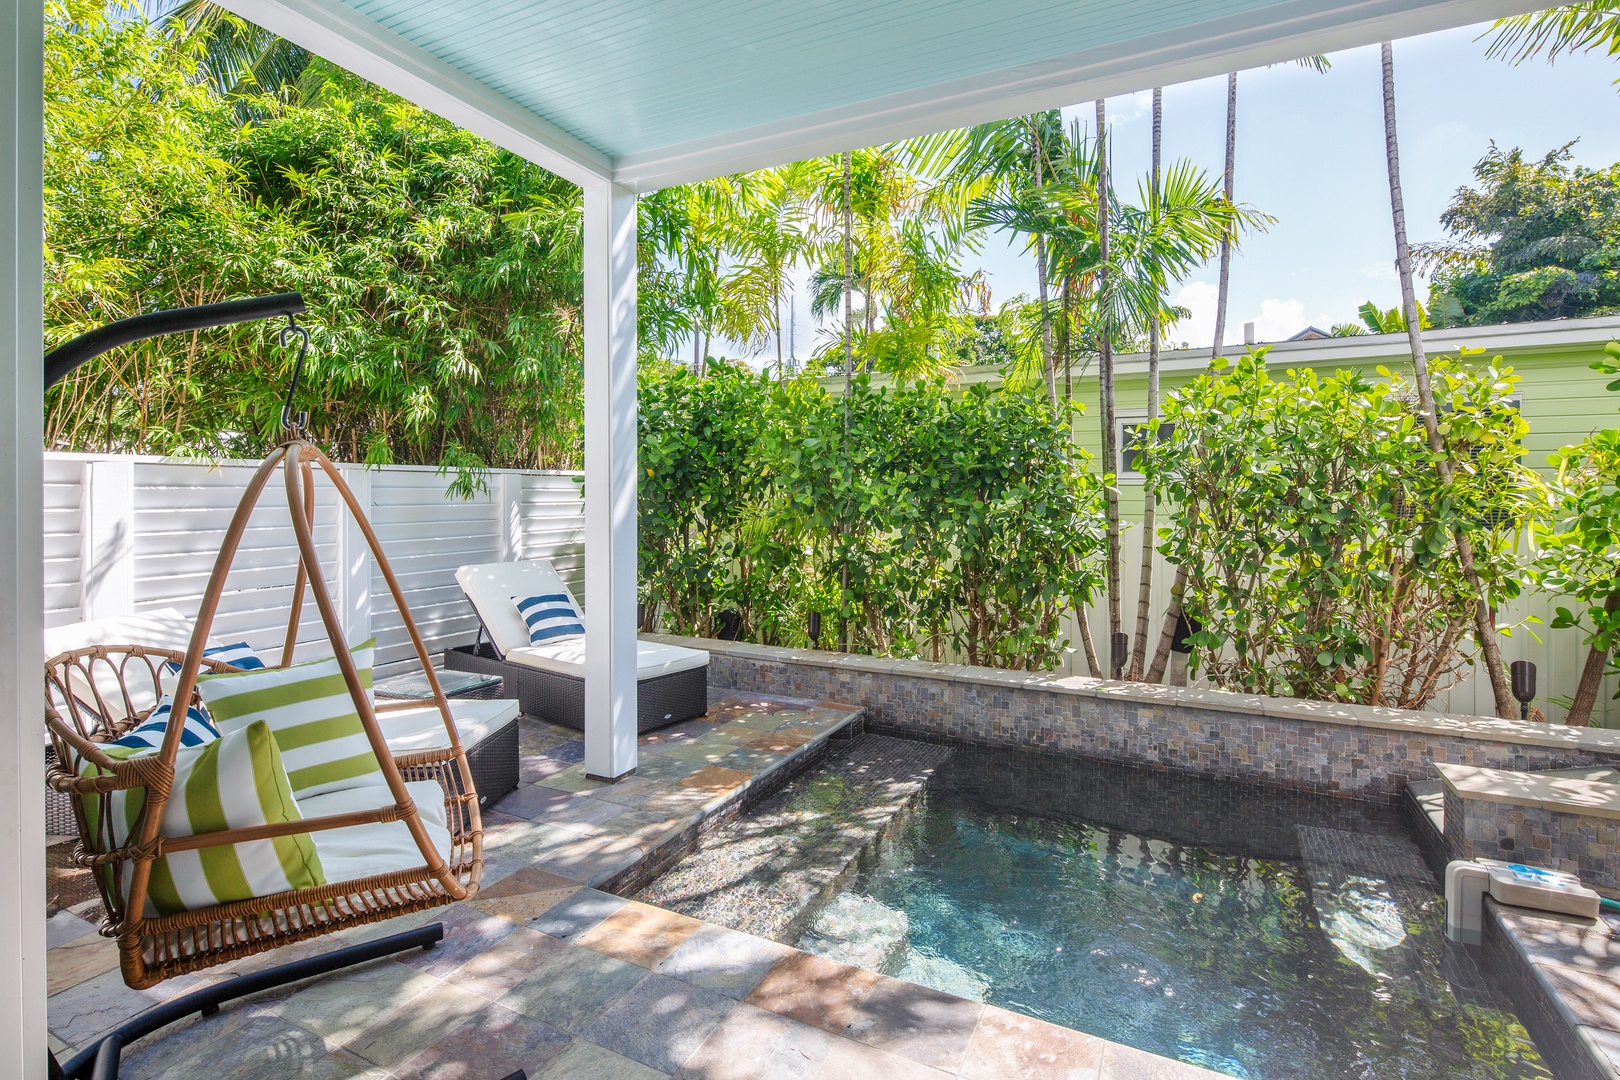 Covered Patio and Pool at Tucked Away! Key West